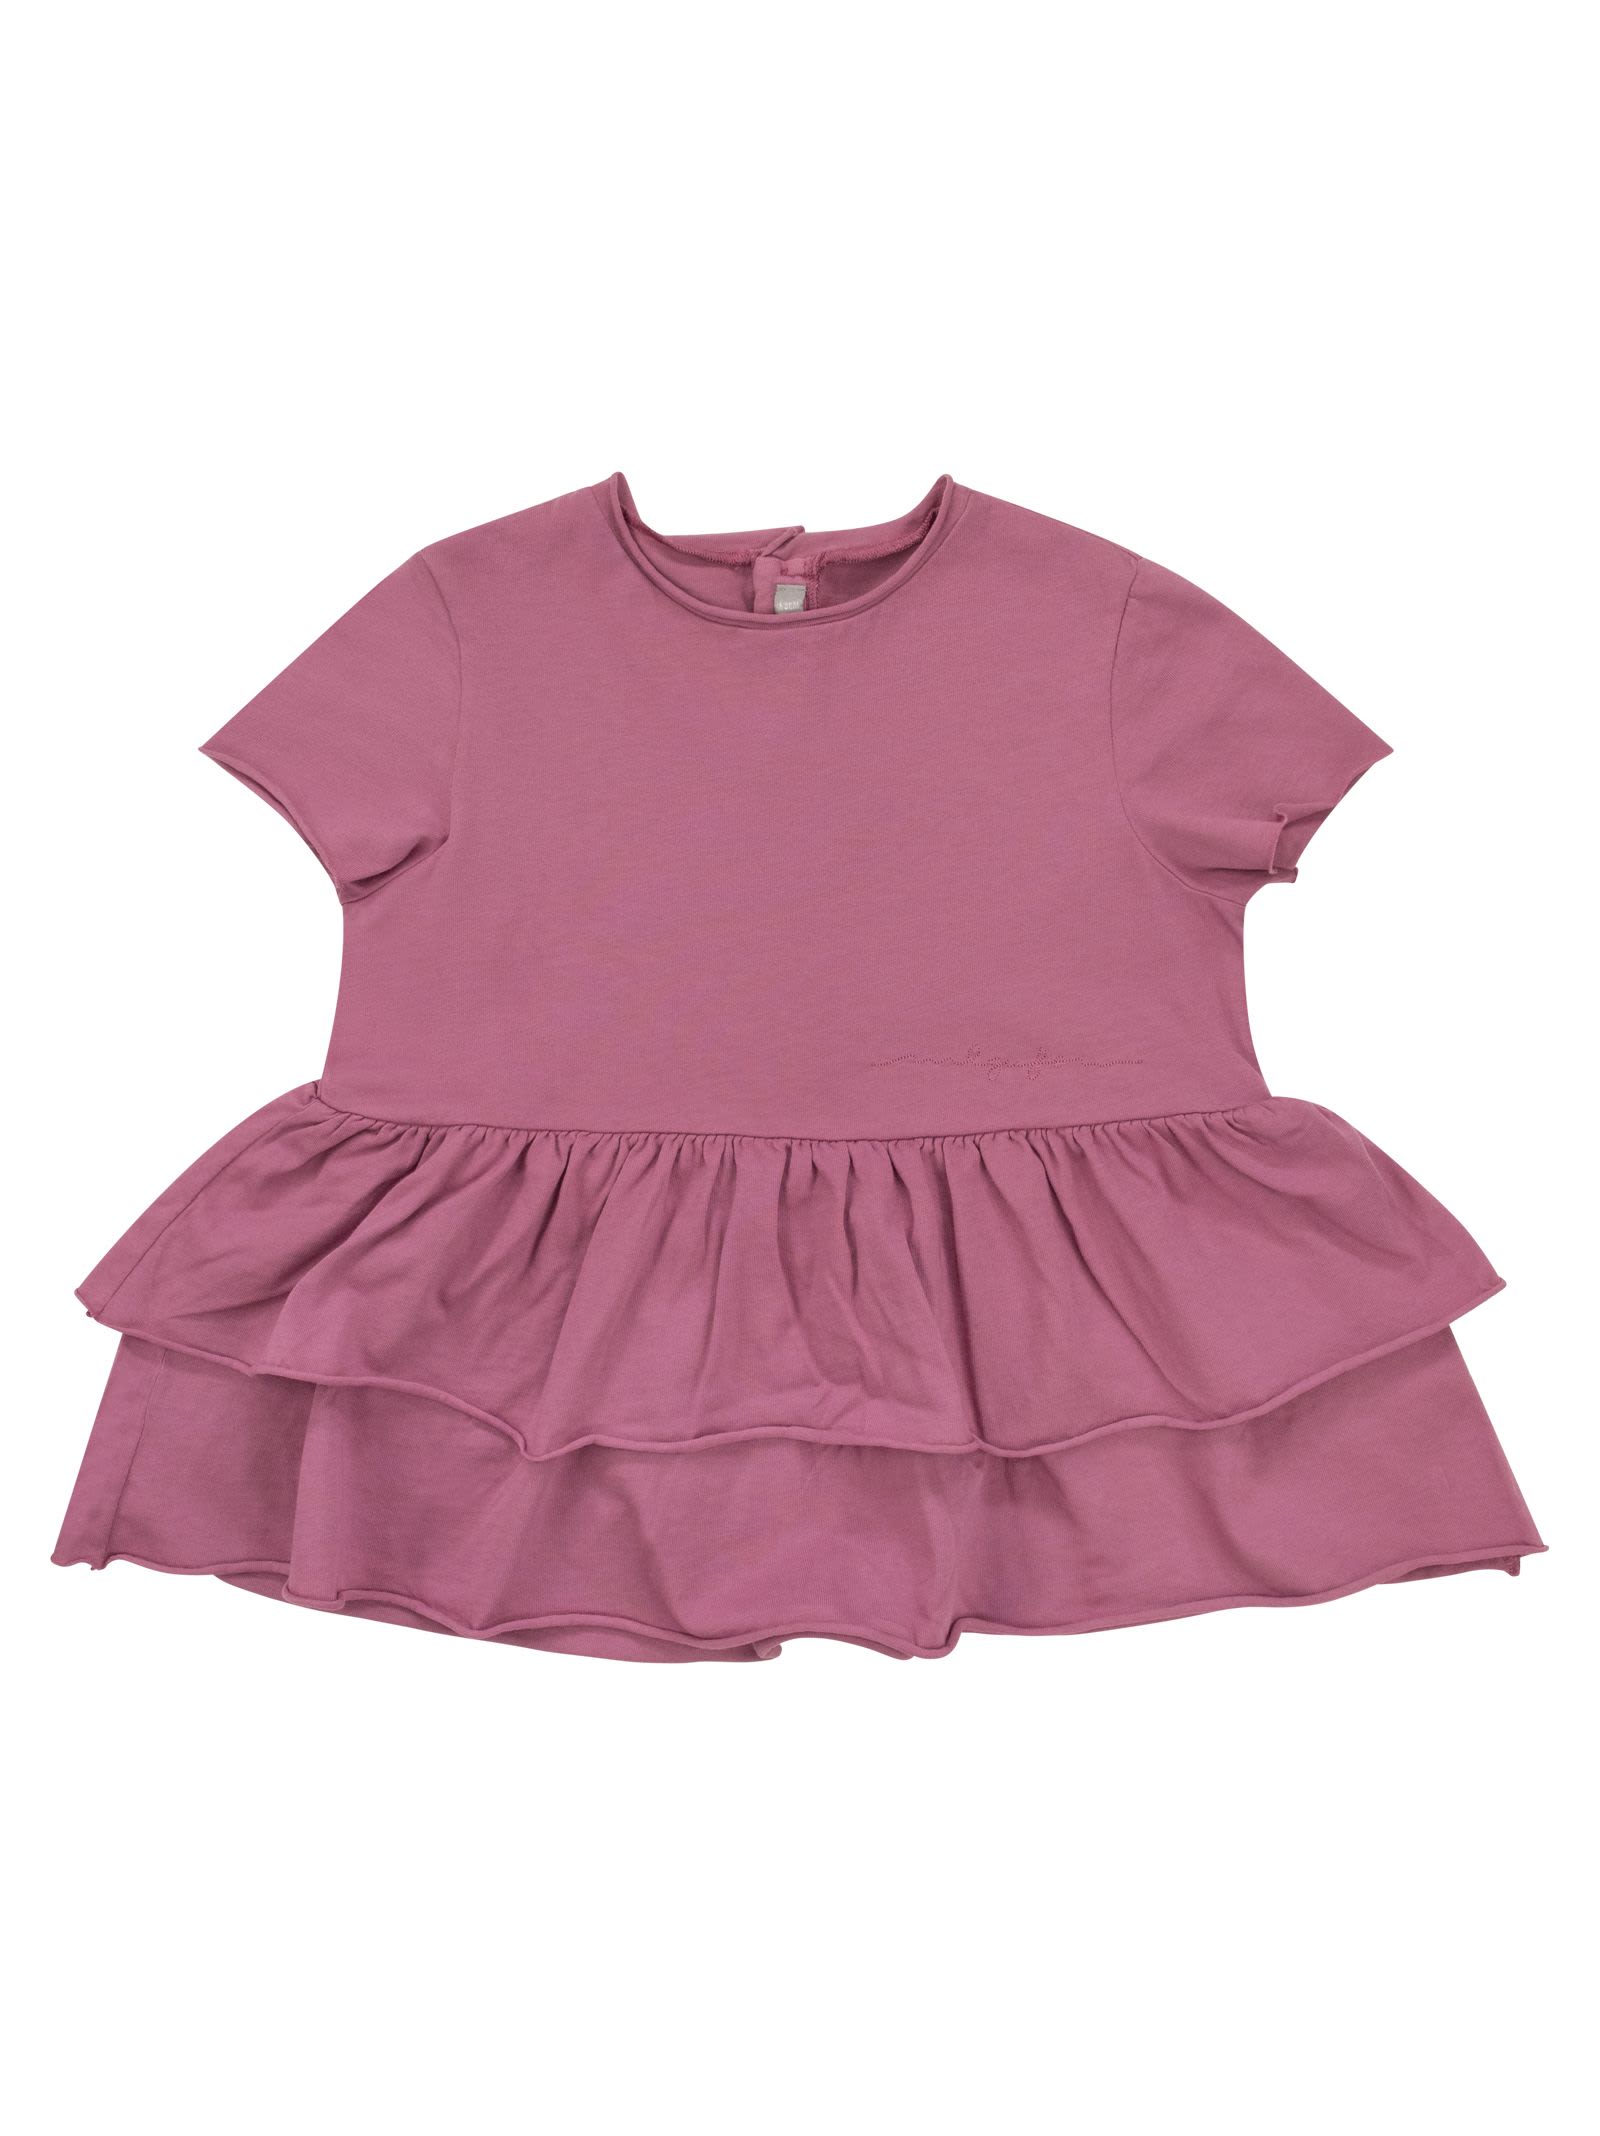 IL GUFO SHORT-SLEEVED T-SHIRT WITH RUFFLES